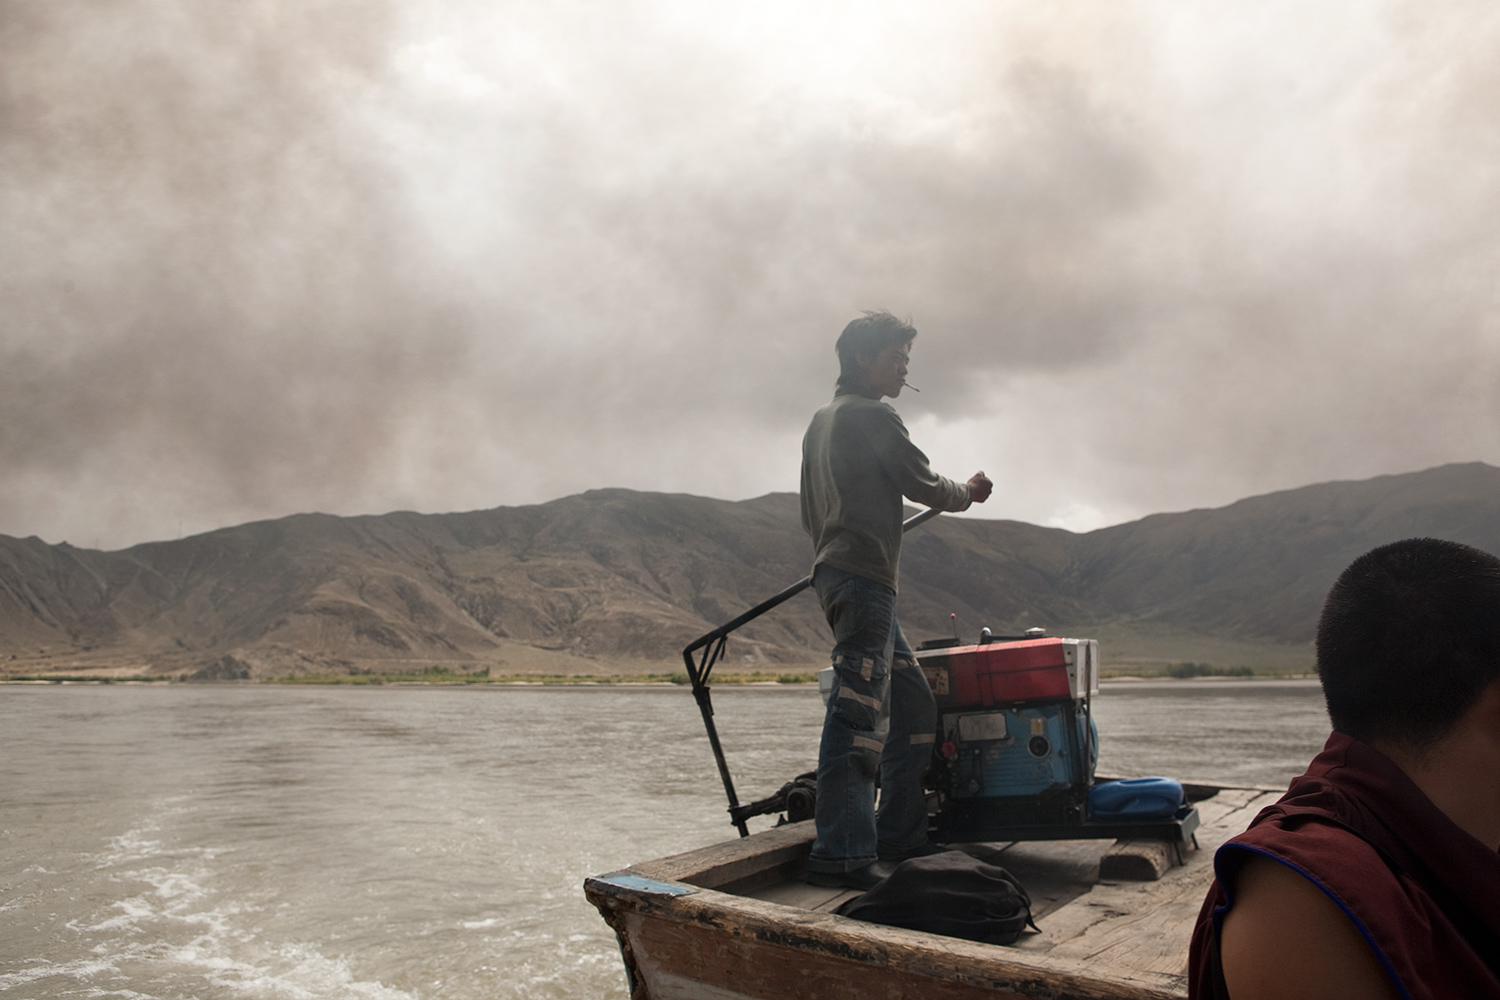  A man navigates a ferry across the Yarlung Tsangpo river for pilgrims traveling to Samye monastery, the oldest monastery in Tibet.  